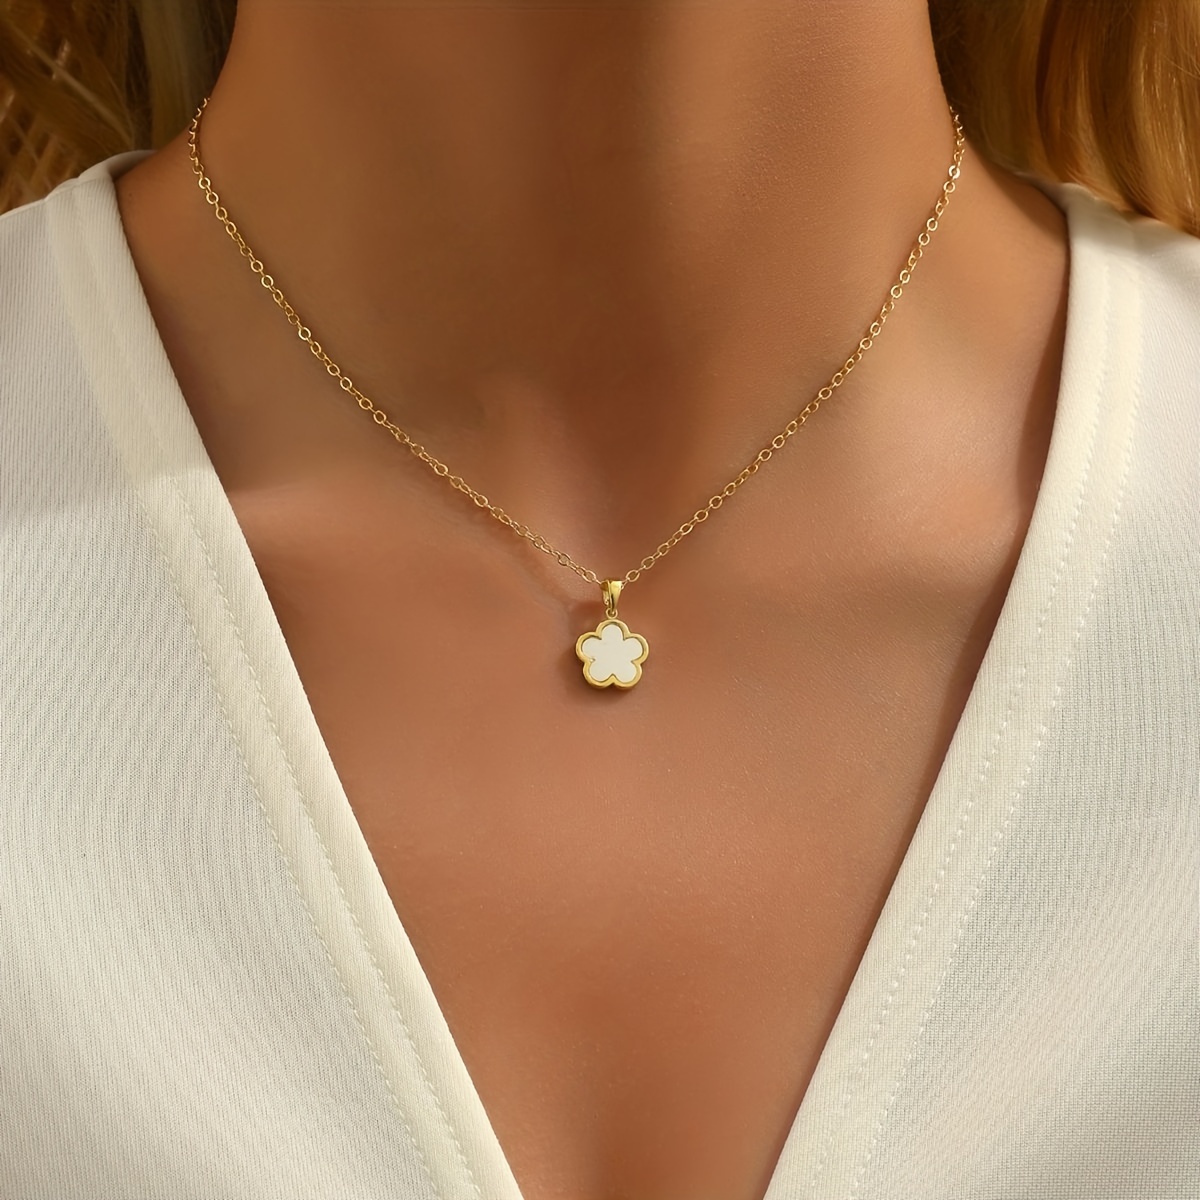 Dainty Stainless Steel Clover Crystal Necklace